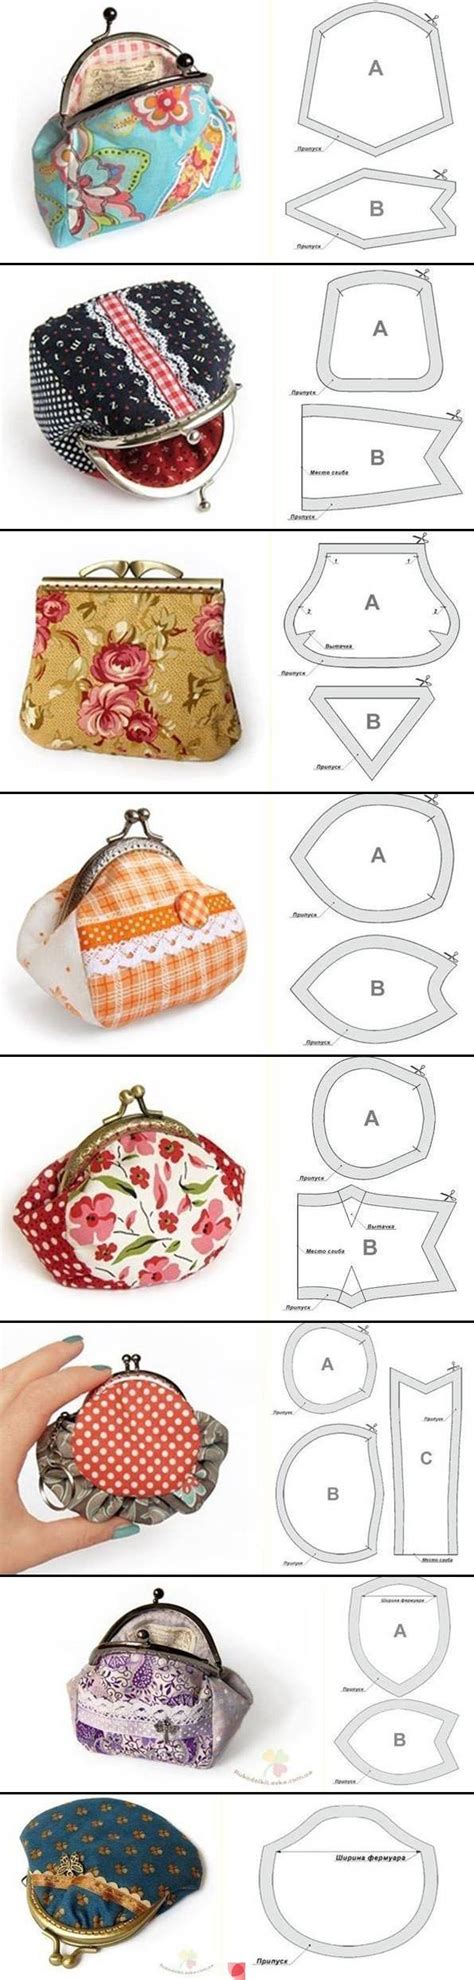 vintage style framed coin purse  sewing tutorial pattern